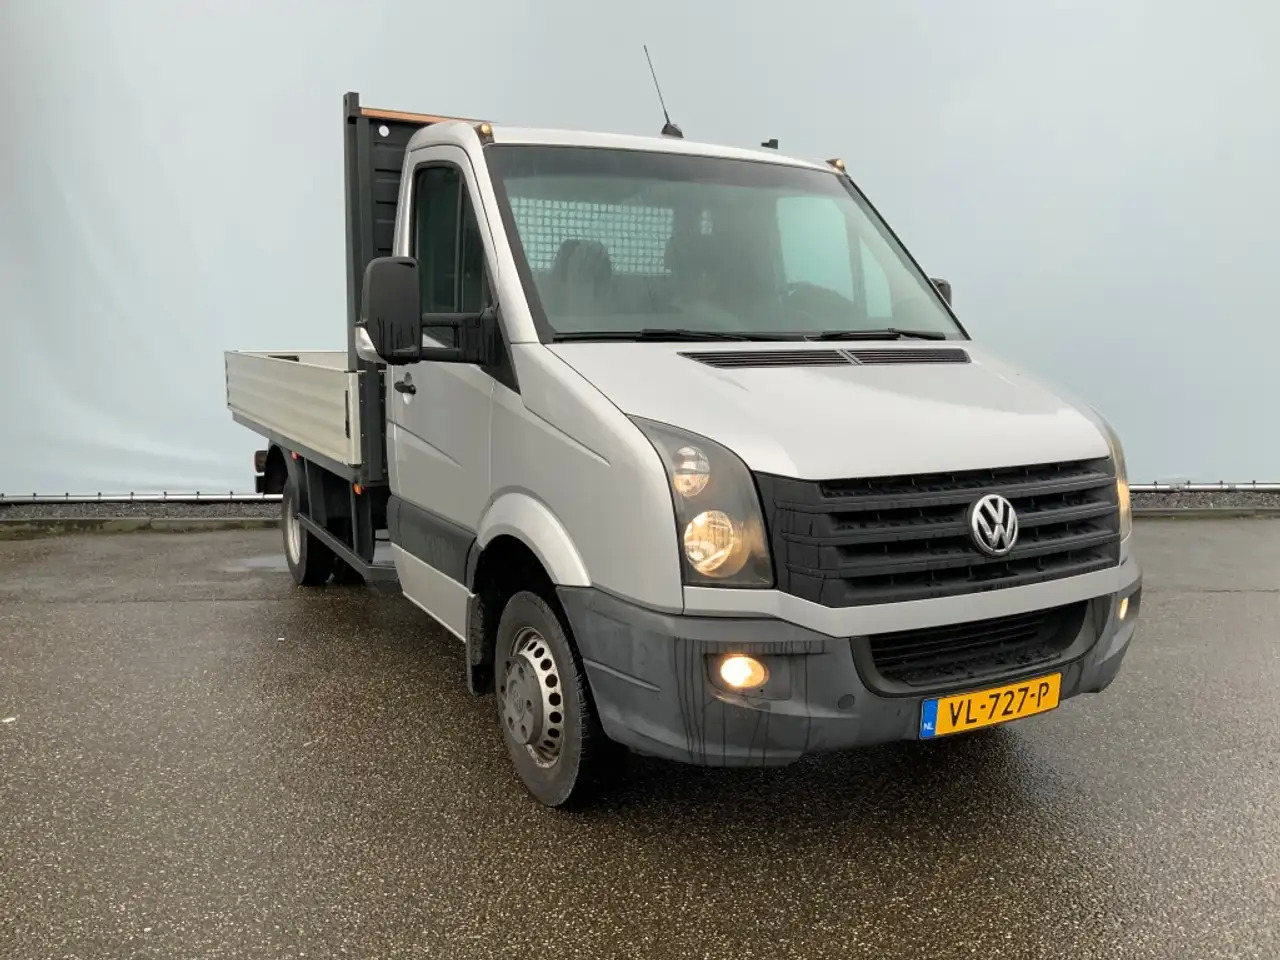 Leasing of Volkswagen Crafter 46 2.0 TDI L2H1 Pick Up Airco Navi Cruise 3 Zits E Volkswagen Crafter 46 2.0 TDI L2H1 Pick Up Airco Navi Cruise 3 Zits E: picture 9